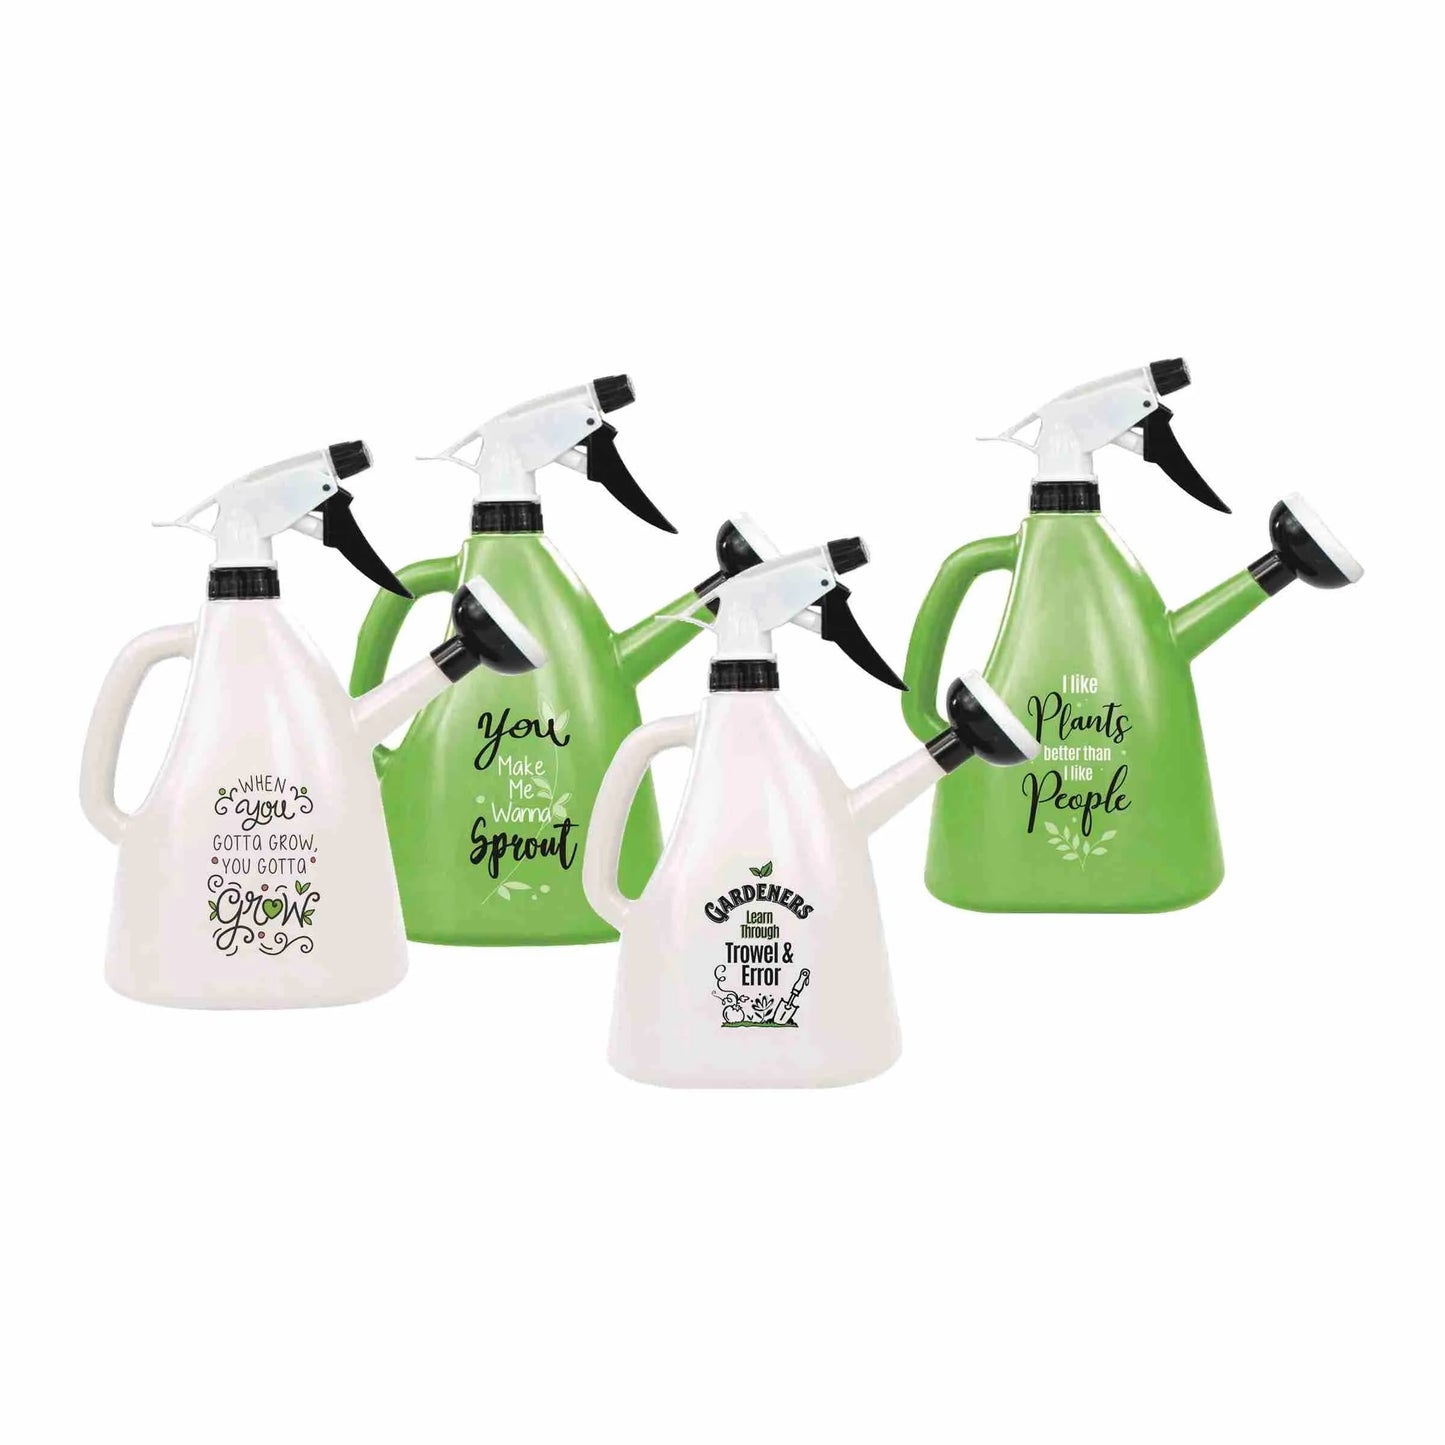 Multi-Functional Watering Can & Sprayer